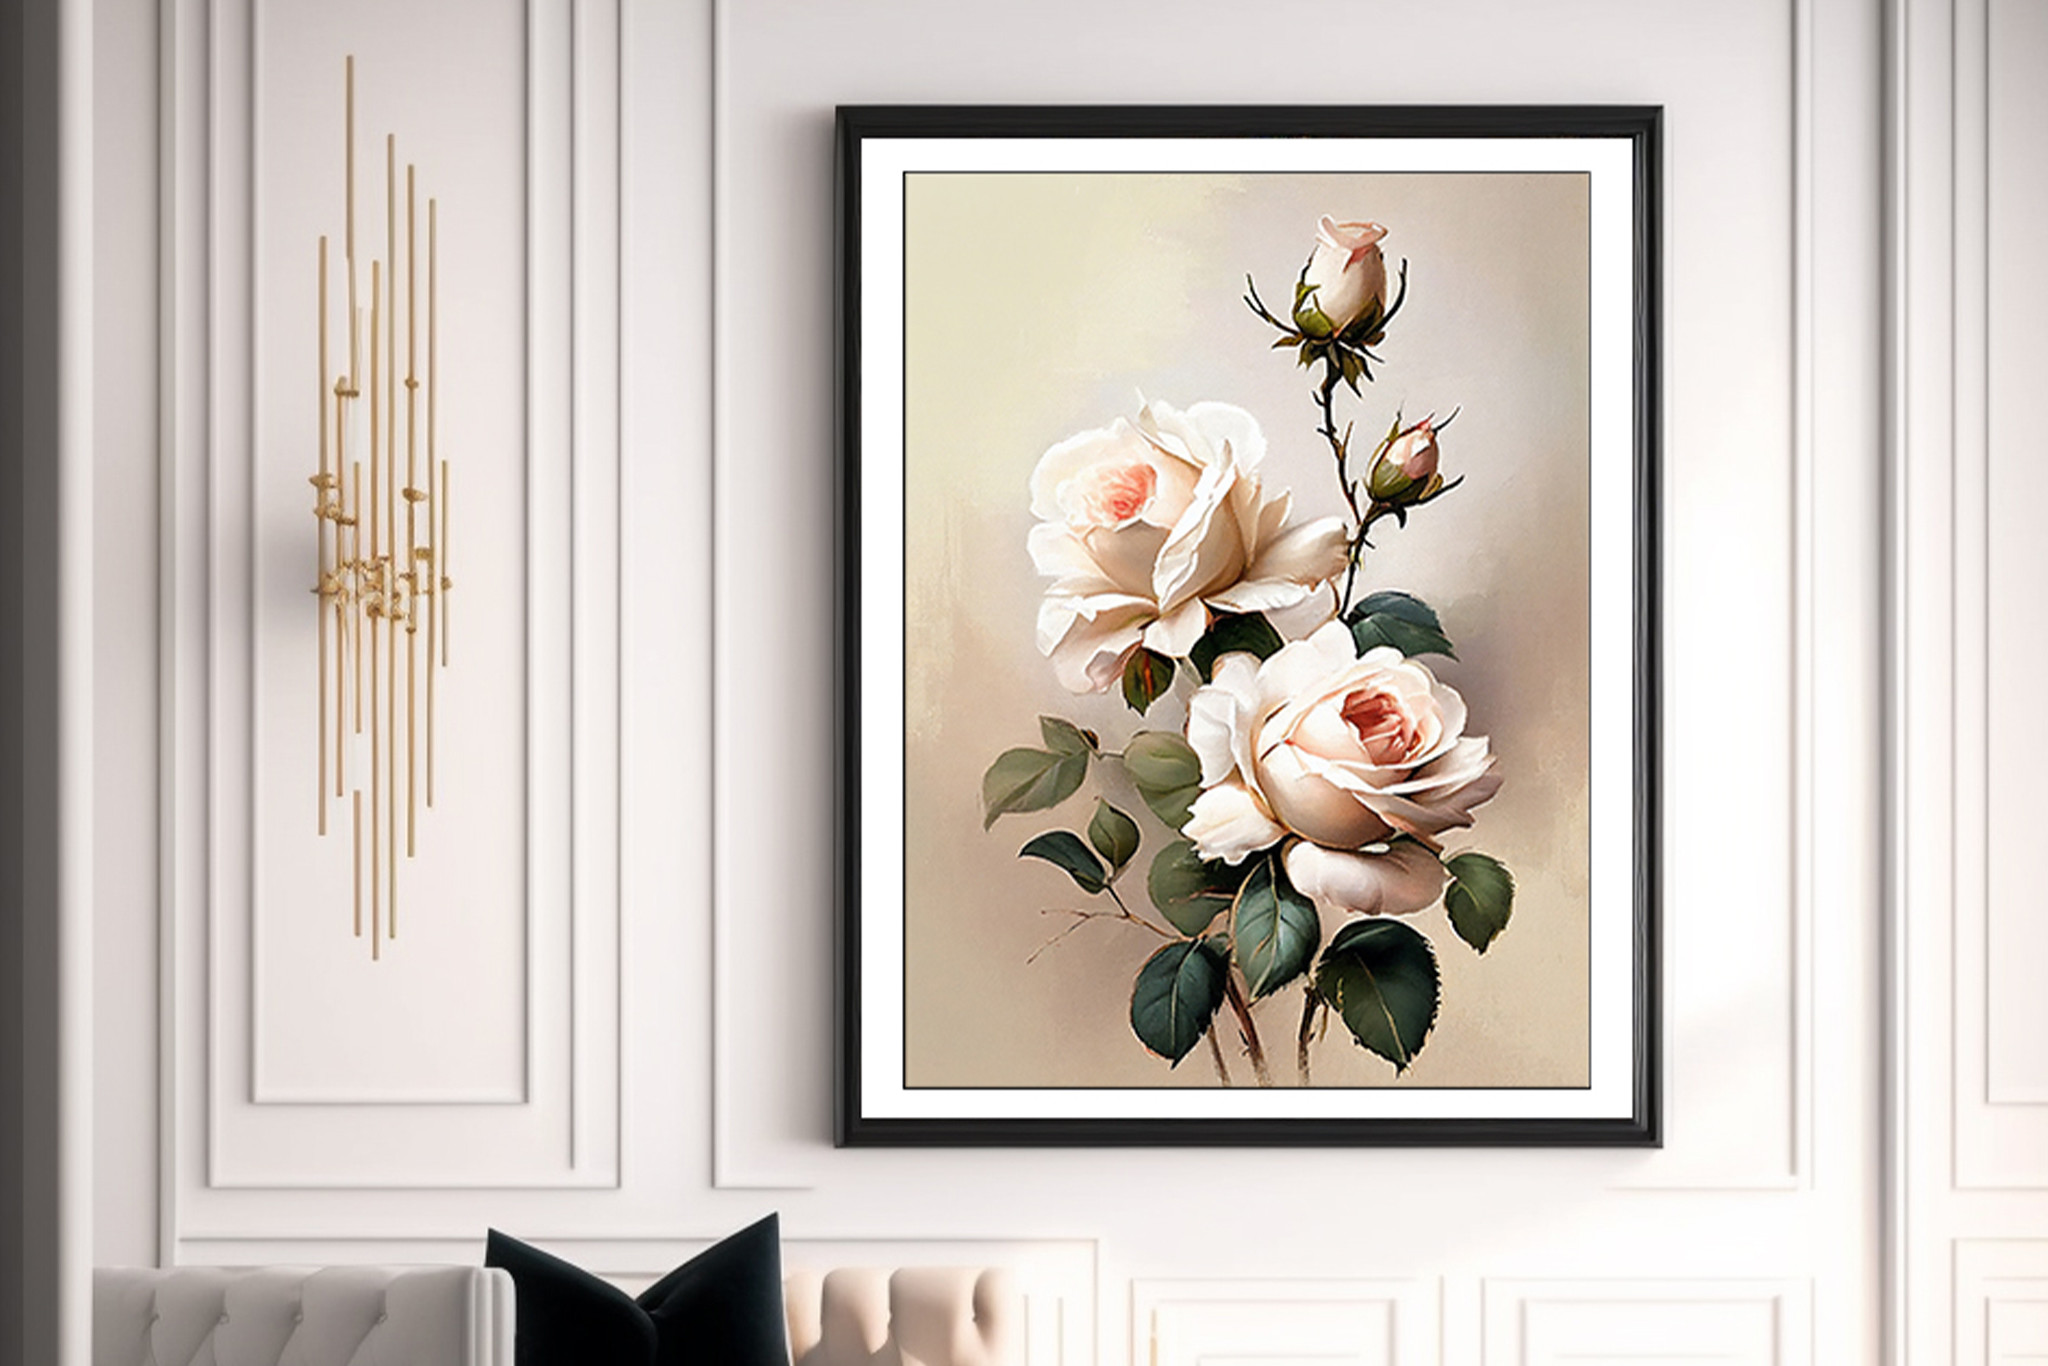 Oil Painting Peach Roses Graphic by modernmasterpieces23 · Creative Fabrica